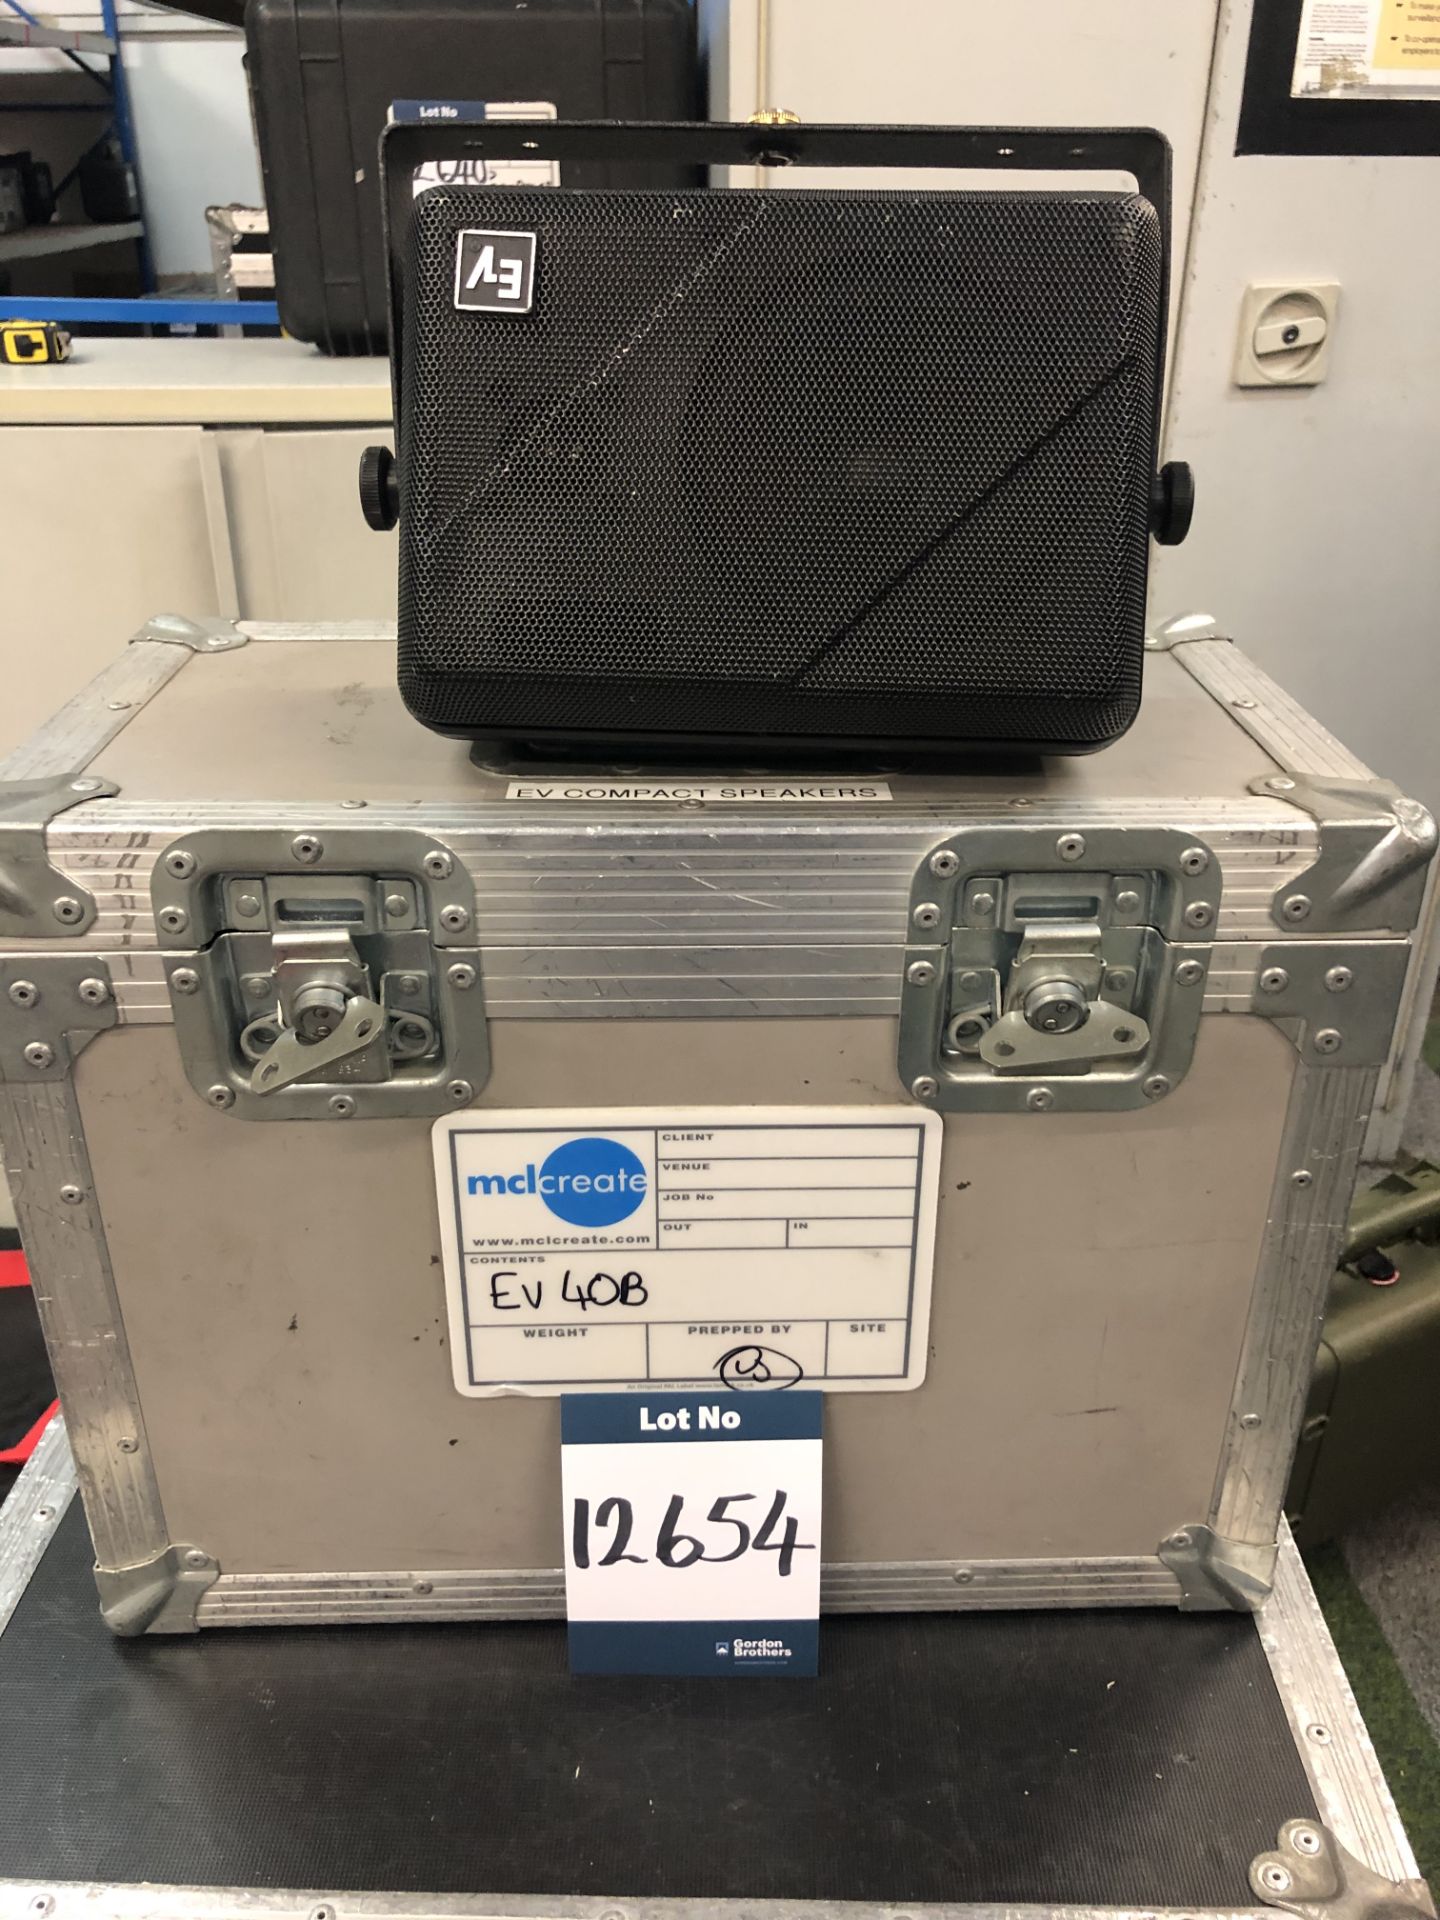 EVS-40 compact monitor in transit case, Serial No.